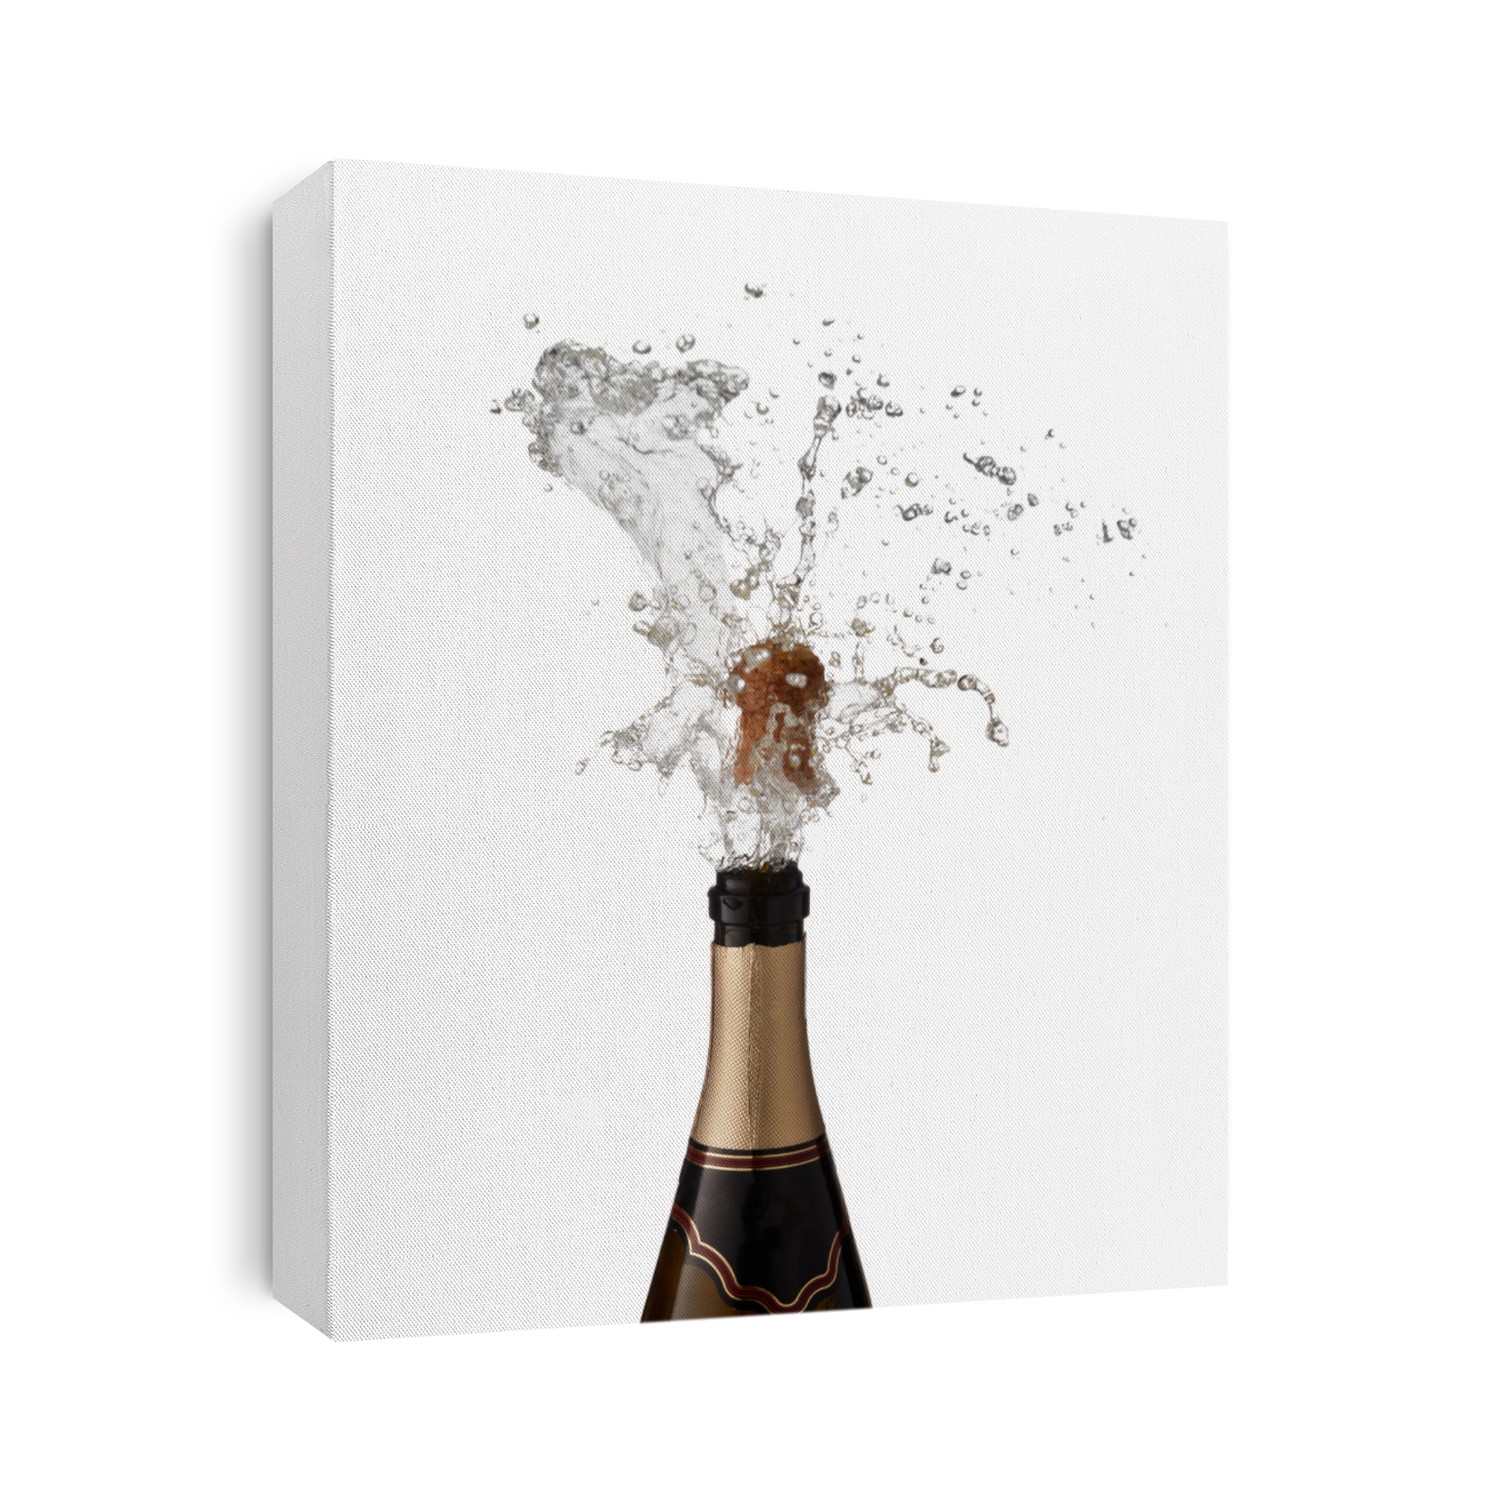 Explosion of splashing  sparkling wine with flying cork out of champagne bottle on a white background